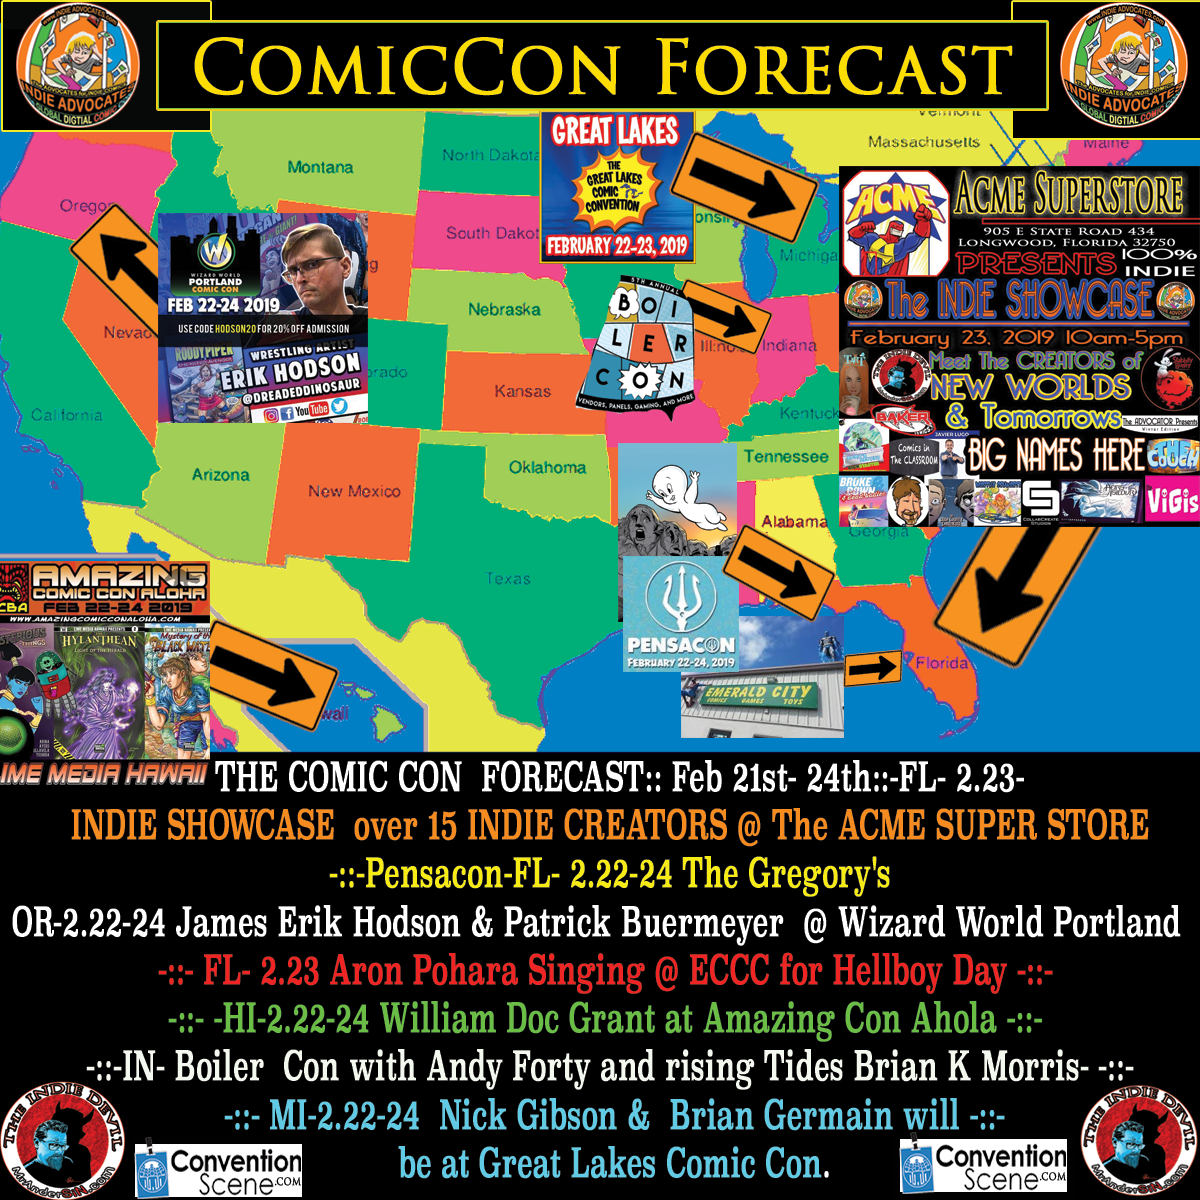 THE COMIC CON  FORECAST:: Feb 21st- 24th::-FL- 2.23- INDIE SHOWCASE  over 15 INDIE CREATORS @ The ACME SUPER STORE -::-Pensacon-FL- 2.22-24 The Gregory’s  -::-OR-2.22-24 James Erik Hodson & Patrick Buermeyer appearing at Wizard World Portland::  -::– FL- 2.23 Aron Pohara Singing @ ECCC for Hellboy Day -::- -HI-2.22-24 William Doc Grant at Amazing Con Ahola   -::-IN- Boiler  Con with Andy Forty and rising Tides Brian K Morris-   &—MI-2.22-24  Nick Gibson &  Brian Germain will be at Great Lakes Comic Con.